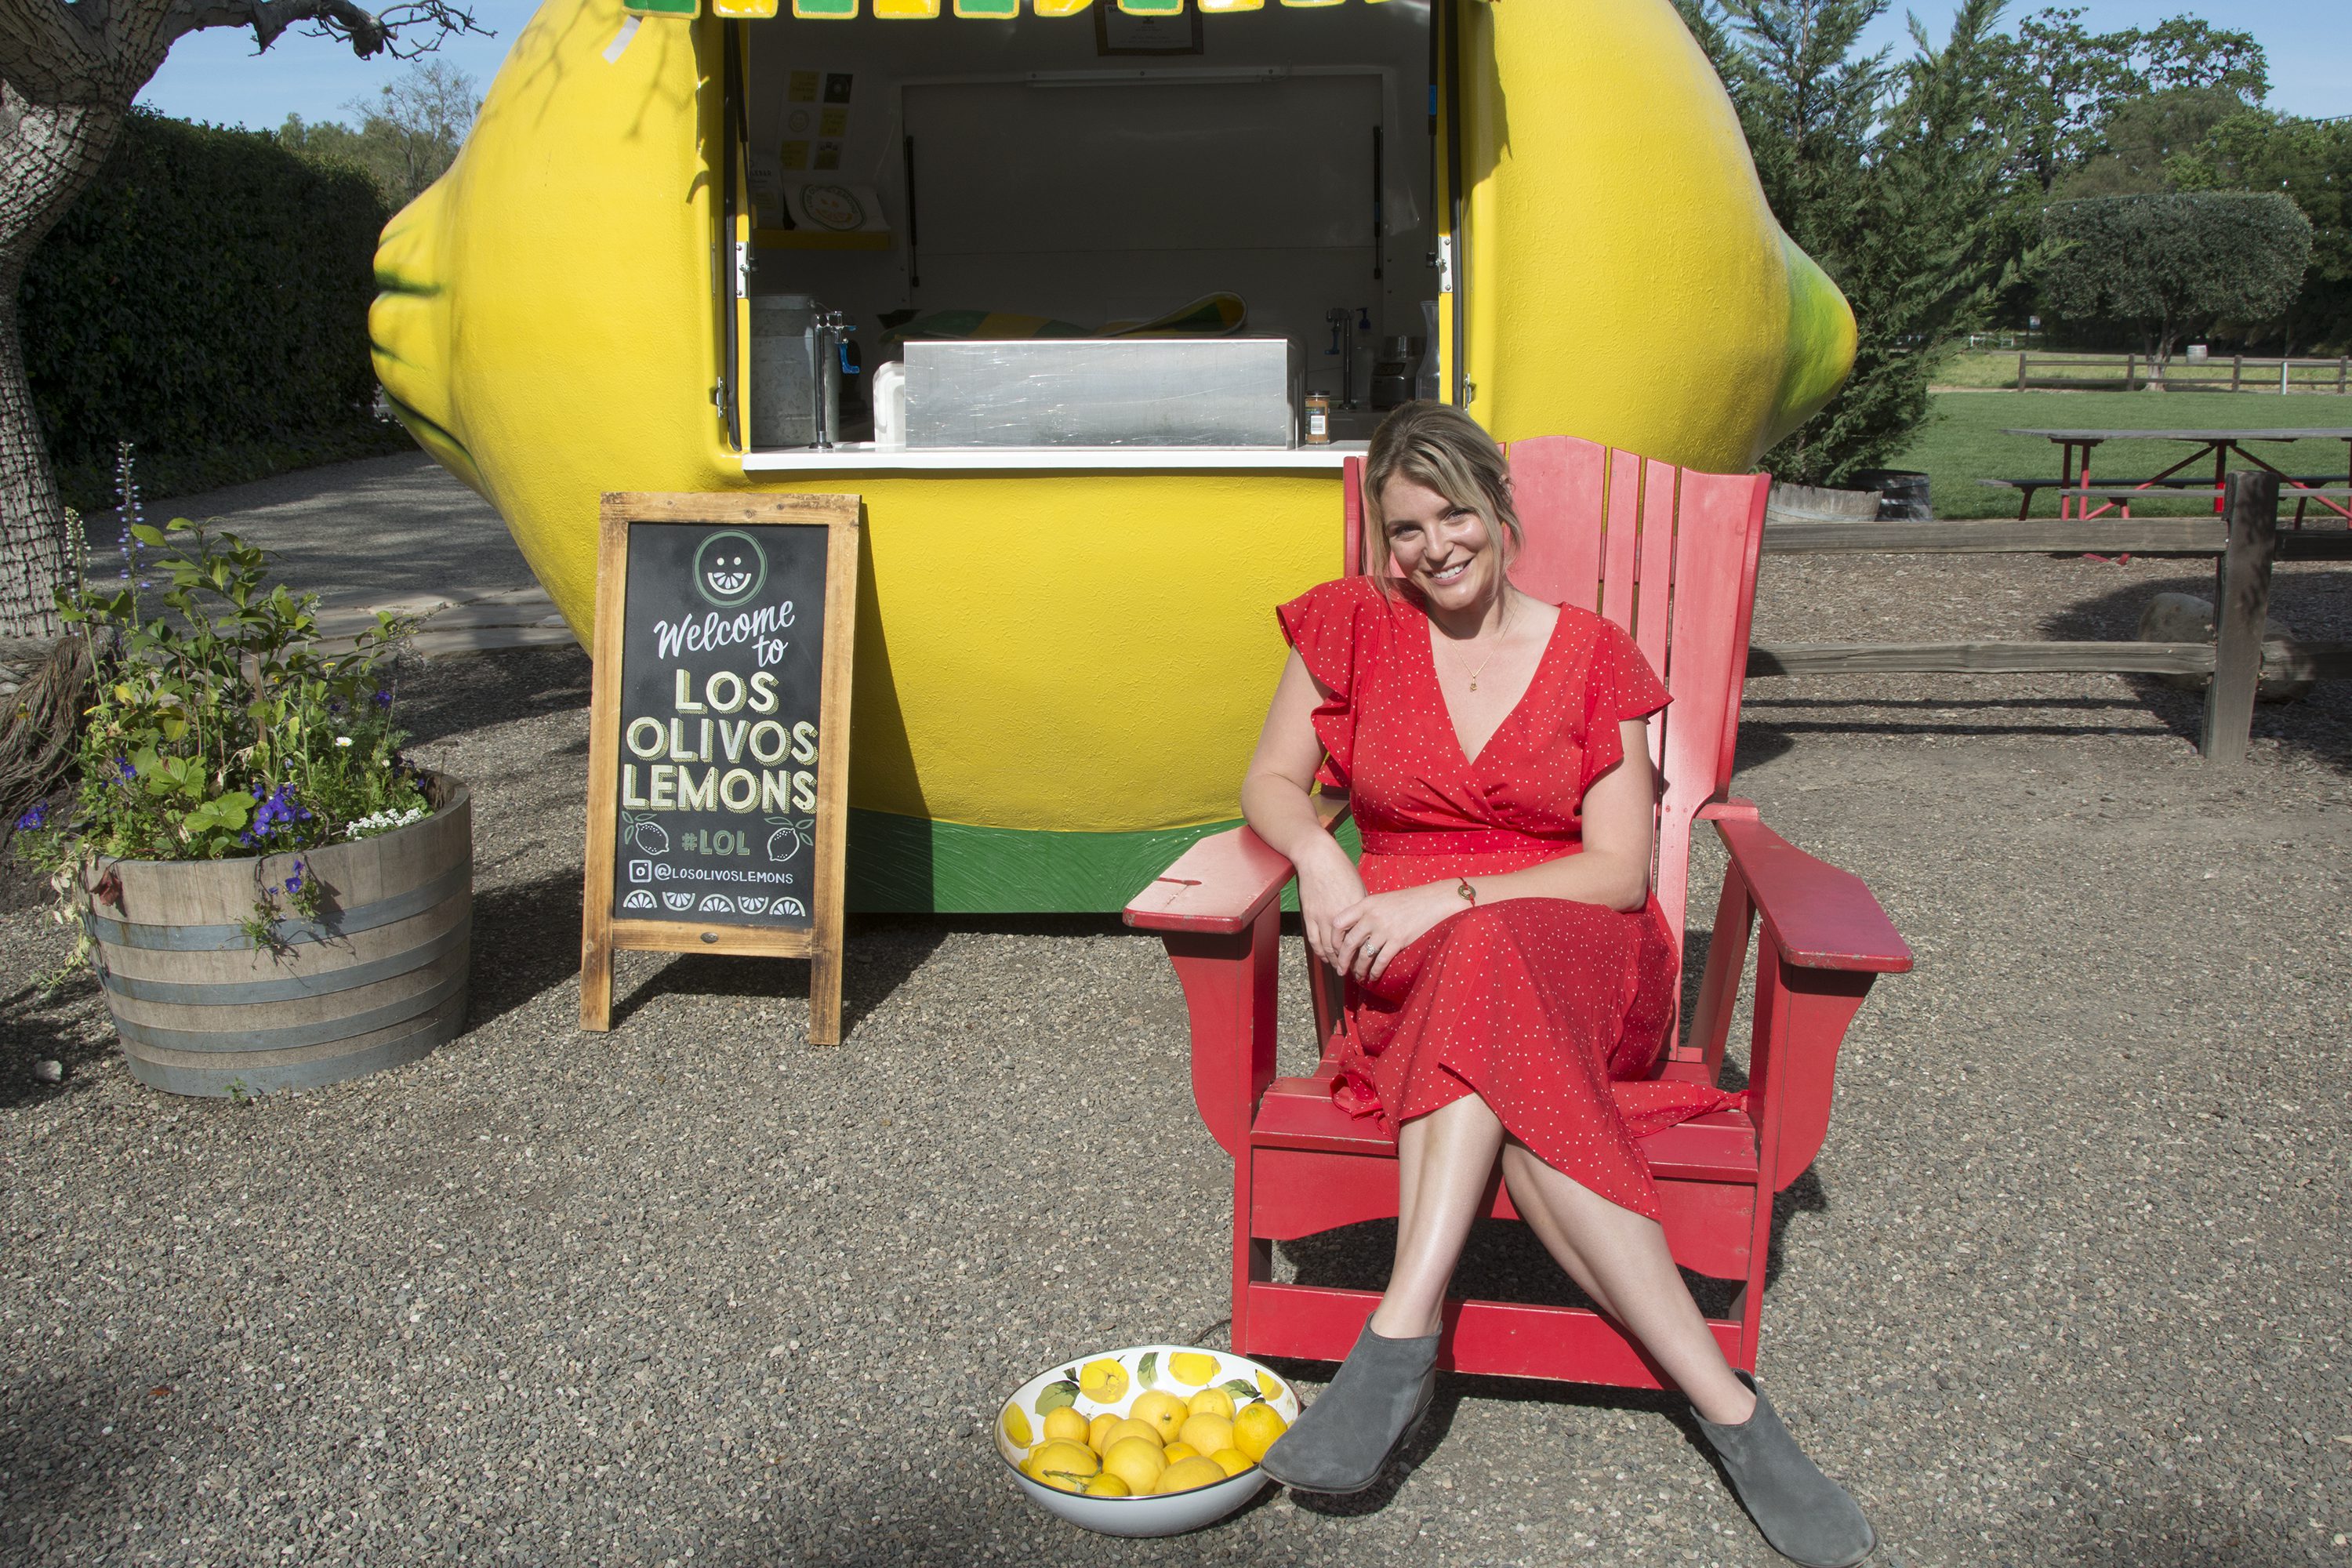 Los Olivos Lemons serves cups of happiness